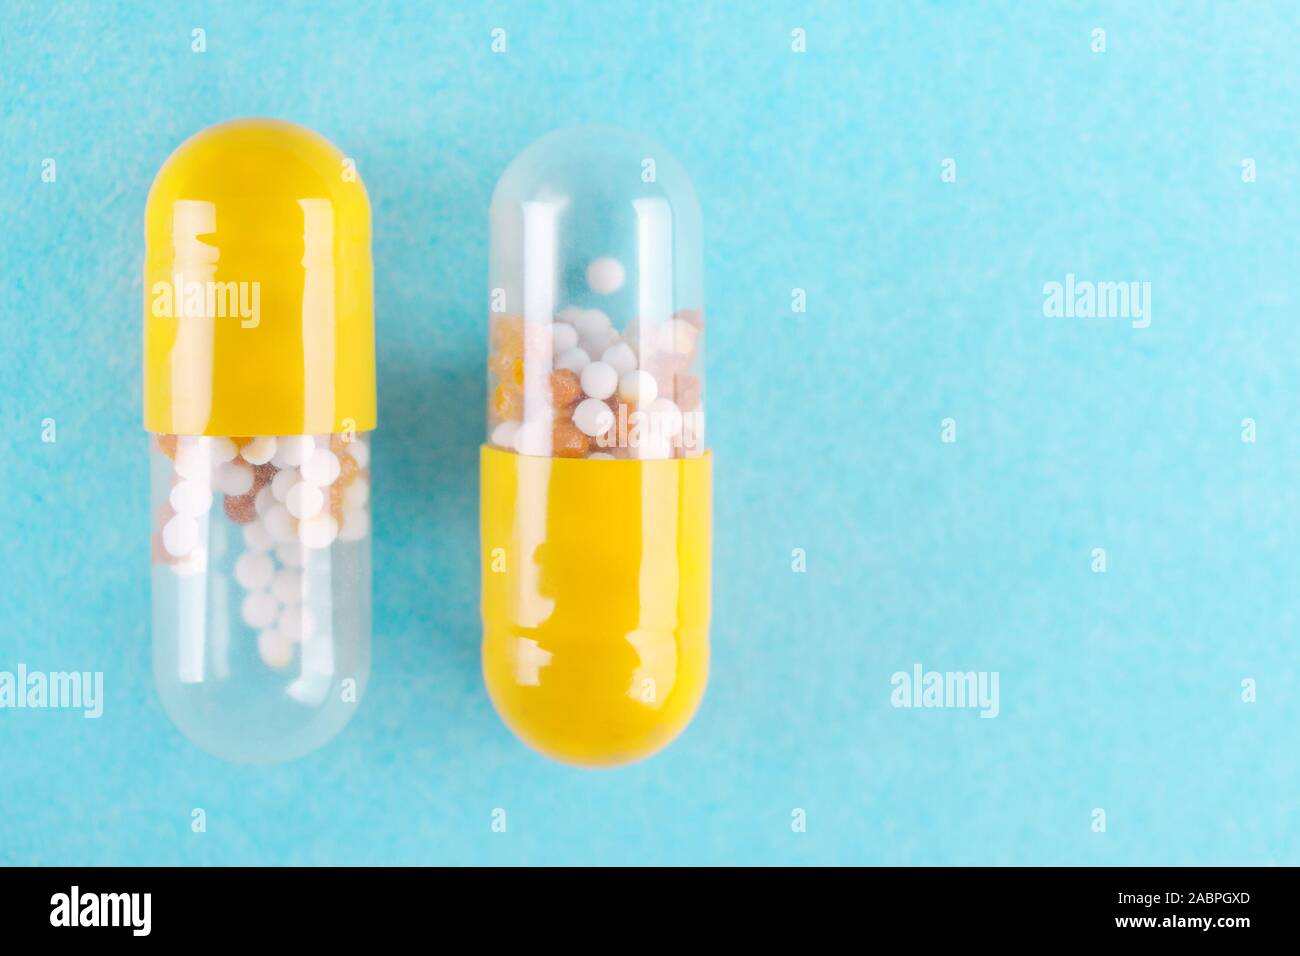 two medicine capsules on blue background flat lay Stock Photo